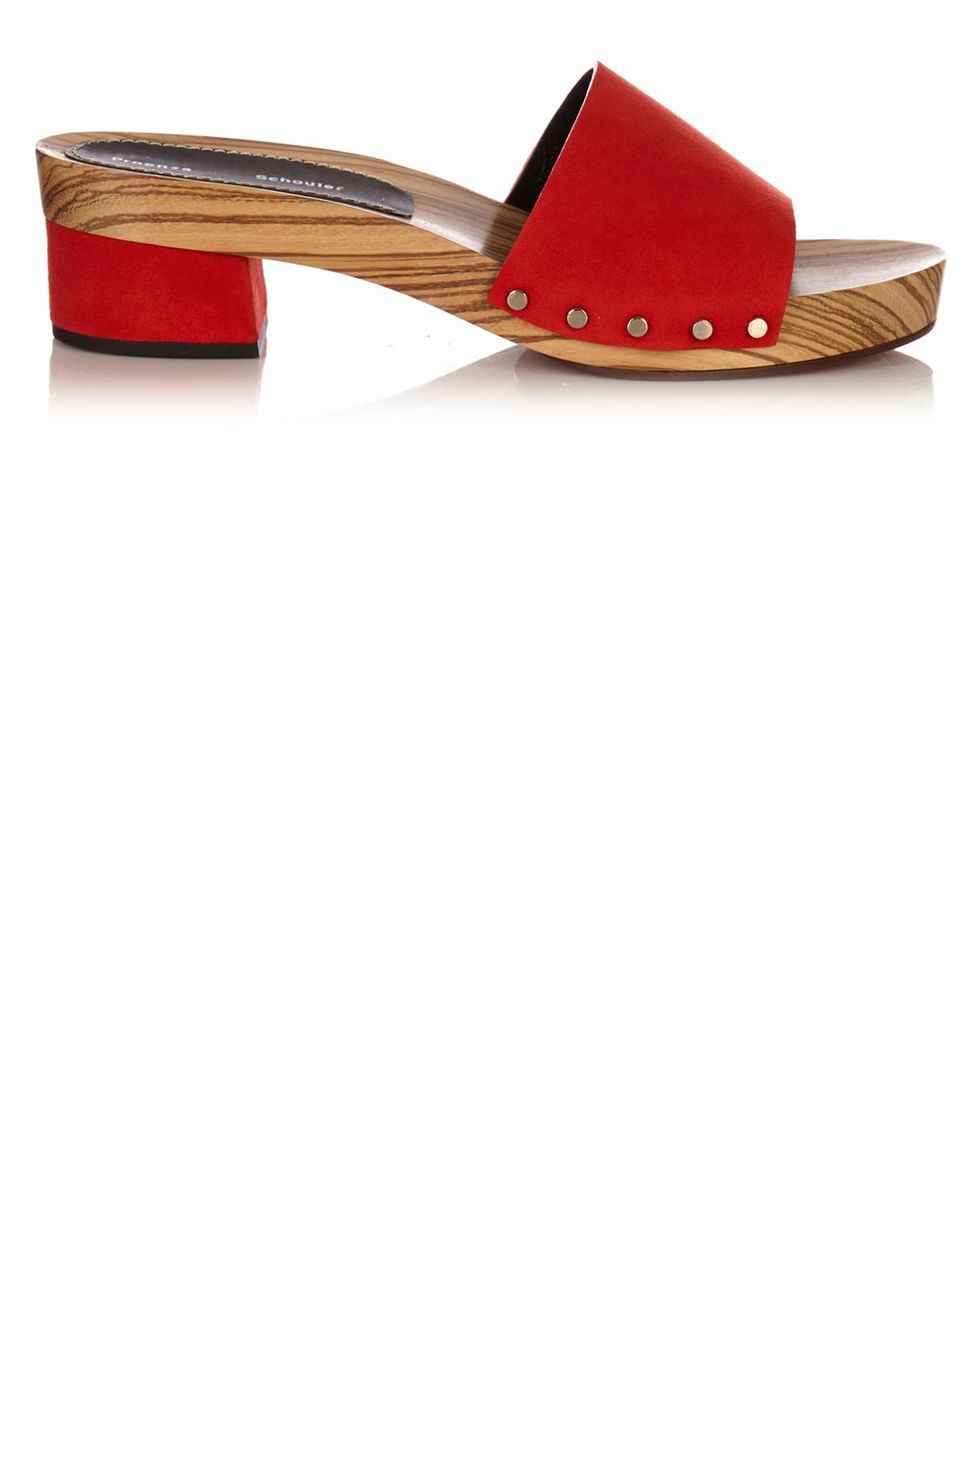 <p><strong>Proenza Schouler</strong> sandal, $377, <a href="http://www.matchesfashion.com/us/products/Proenza-Schouler-Suede-block-heel-clog-slides-1056135" target="_blank">matchesfashion.com</a>. </p>